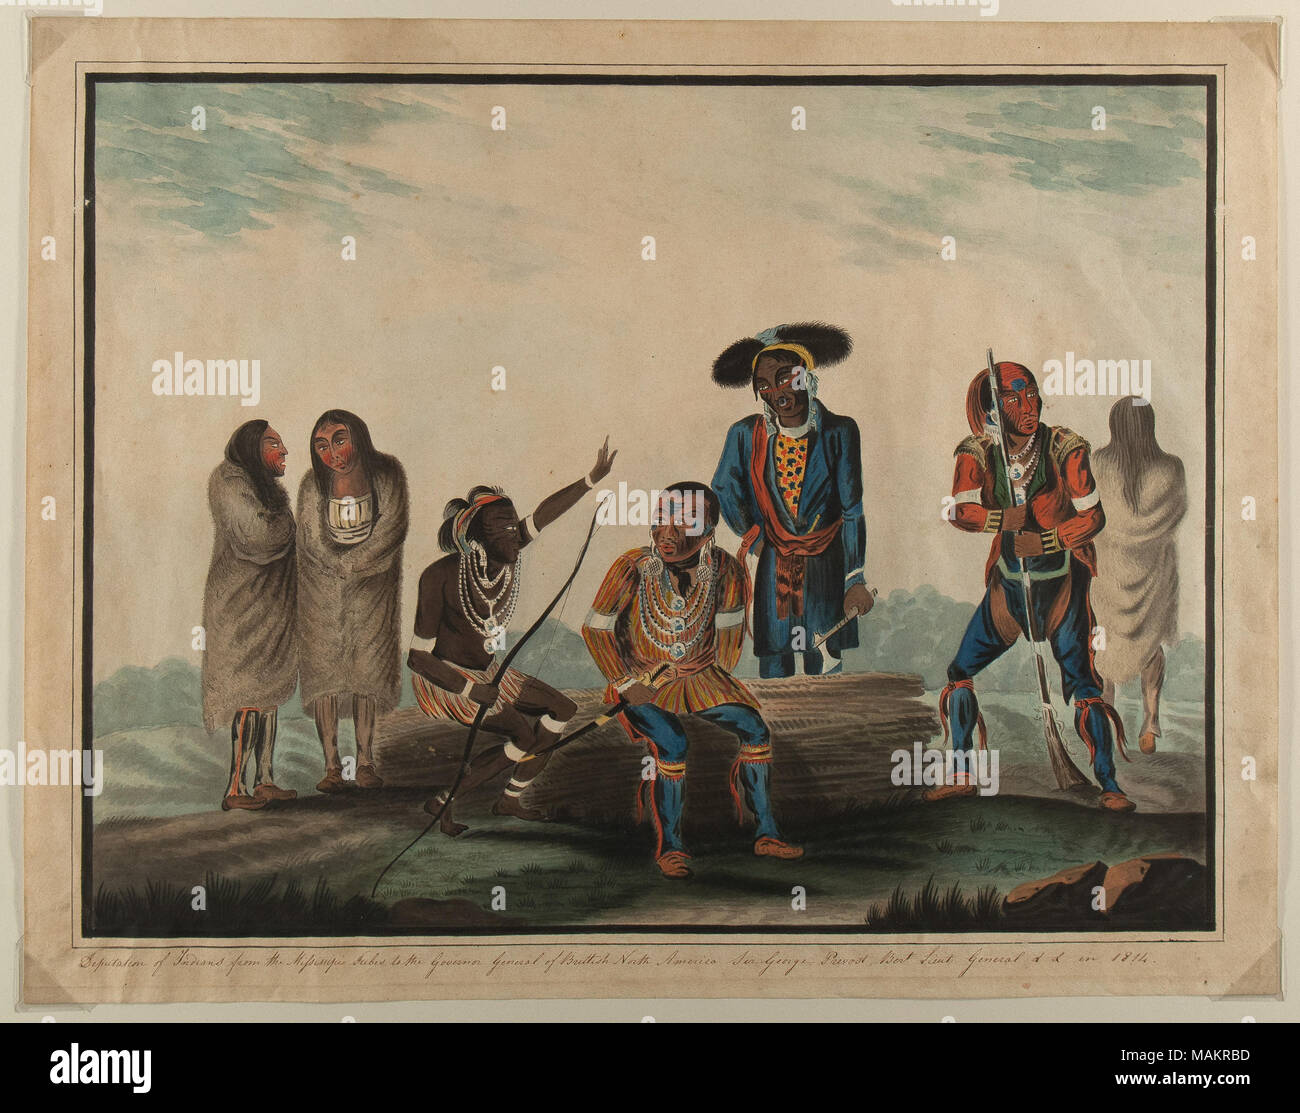 Watercolor painting, 'Deputation of Indians from the Mississippi Tribes to the Governor General of British North America, Sir George Prevost. Baronet. Lieut. General, [etc.] in 1814.' attributed to Rudolf Von Steiger. The scene depicts an official Indian delegation at the end of the War of 1812. Title: Deputation of Indians from the Mississippi Tribes to the Governor General of British North America, Sir George Prevost. Baronet. Lieut. General, [etc.] in 1814  . 1814. Rudolf Von Steiger Stock Photo